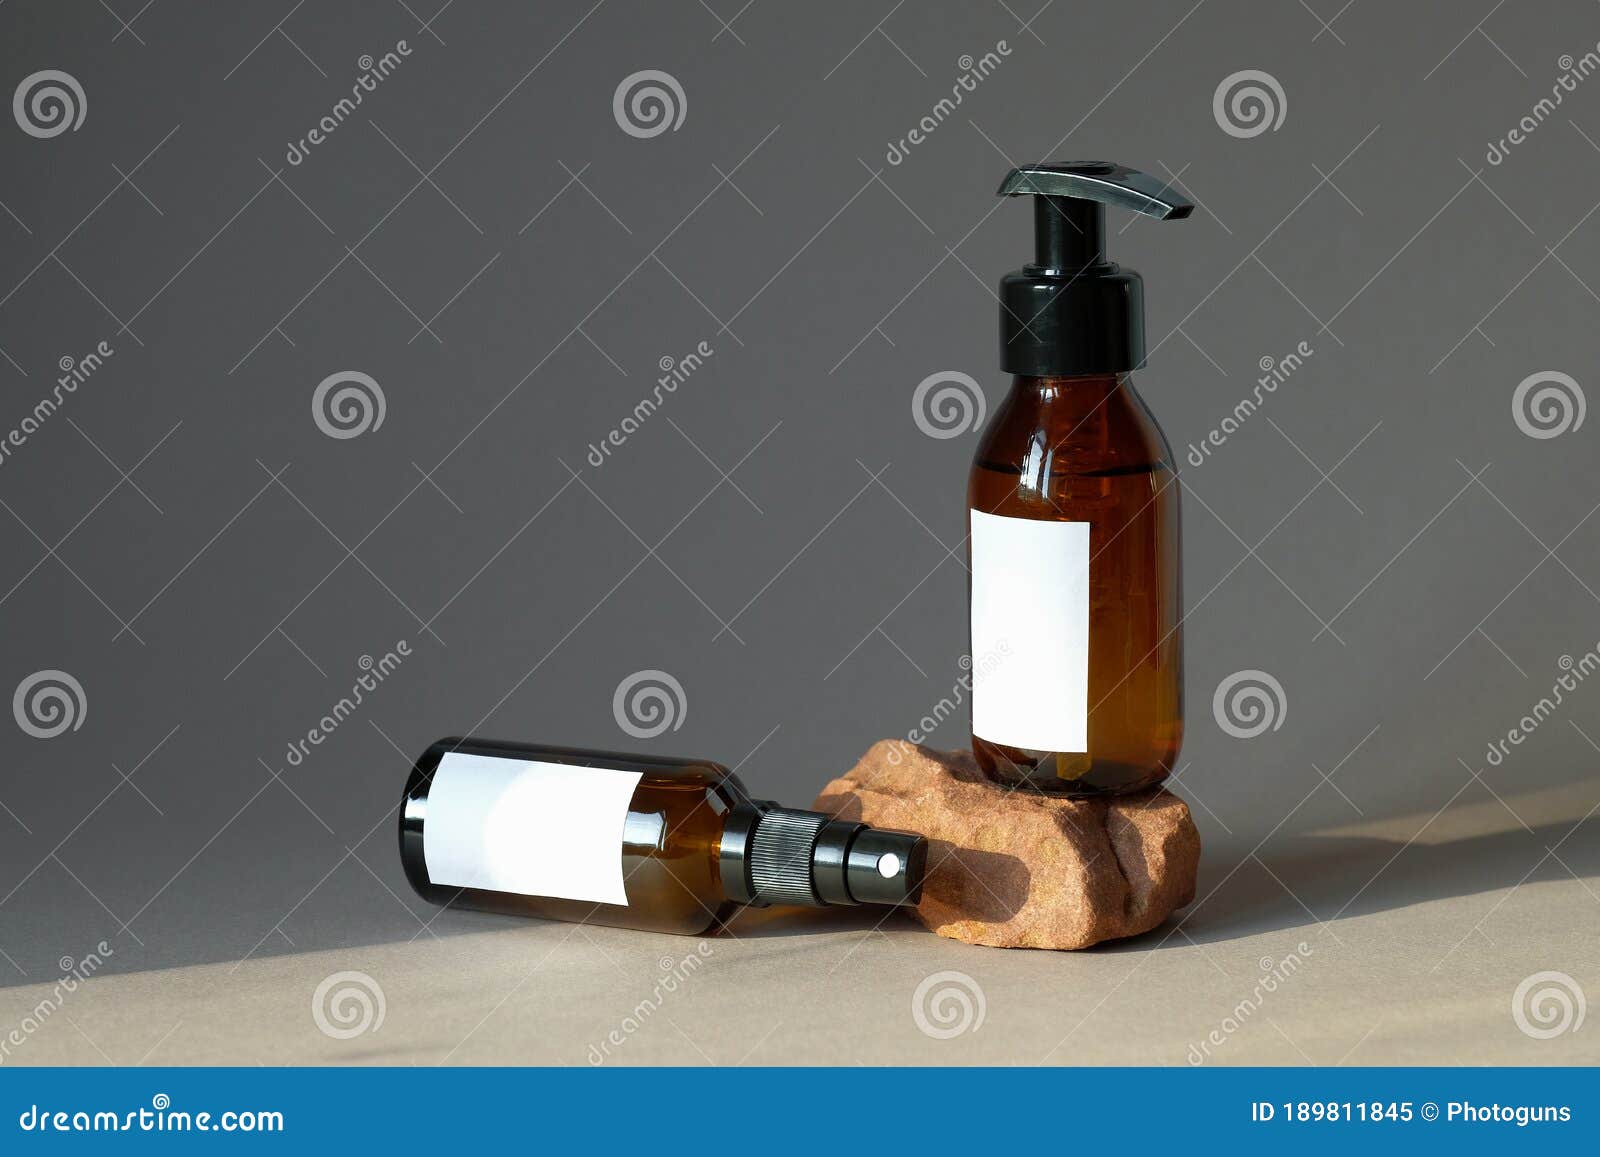 Download Set Of Cosmetic Dark Amber Glass Bottles Mockup. Pump Bottle Hand Soap And Organic Body Spray ...